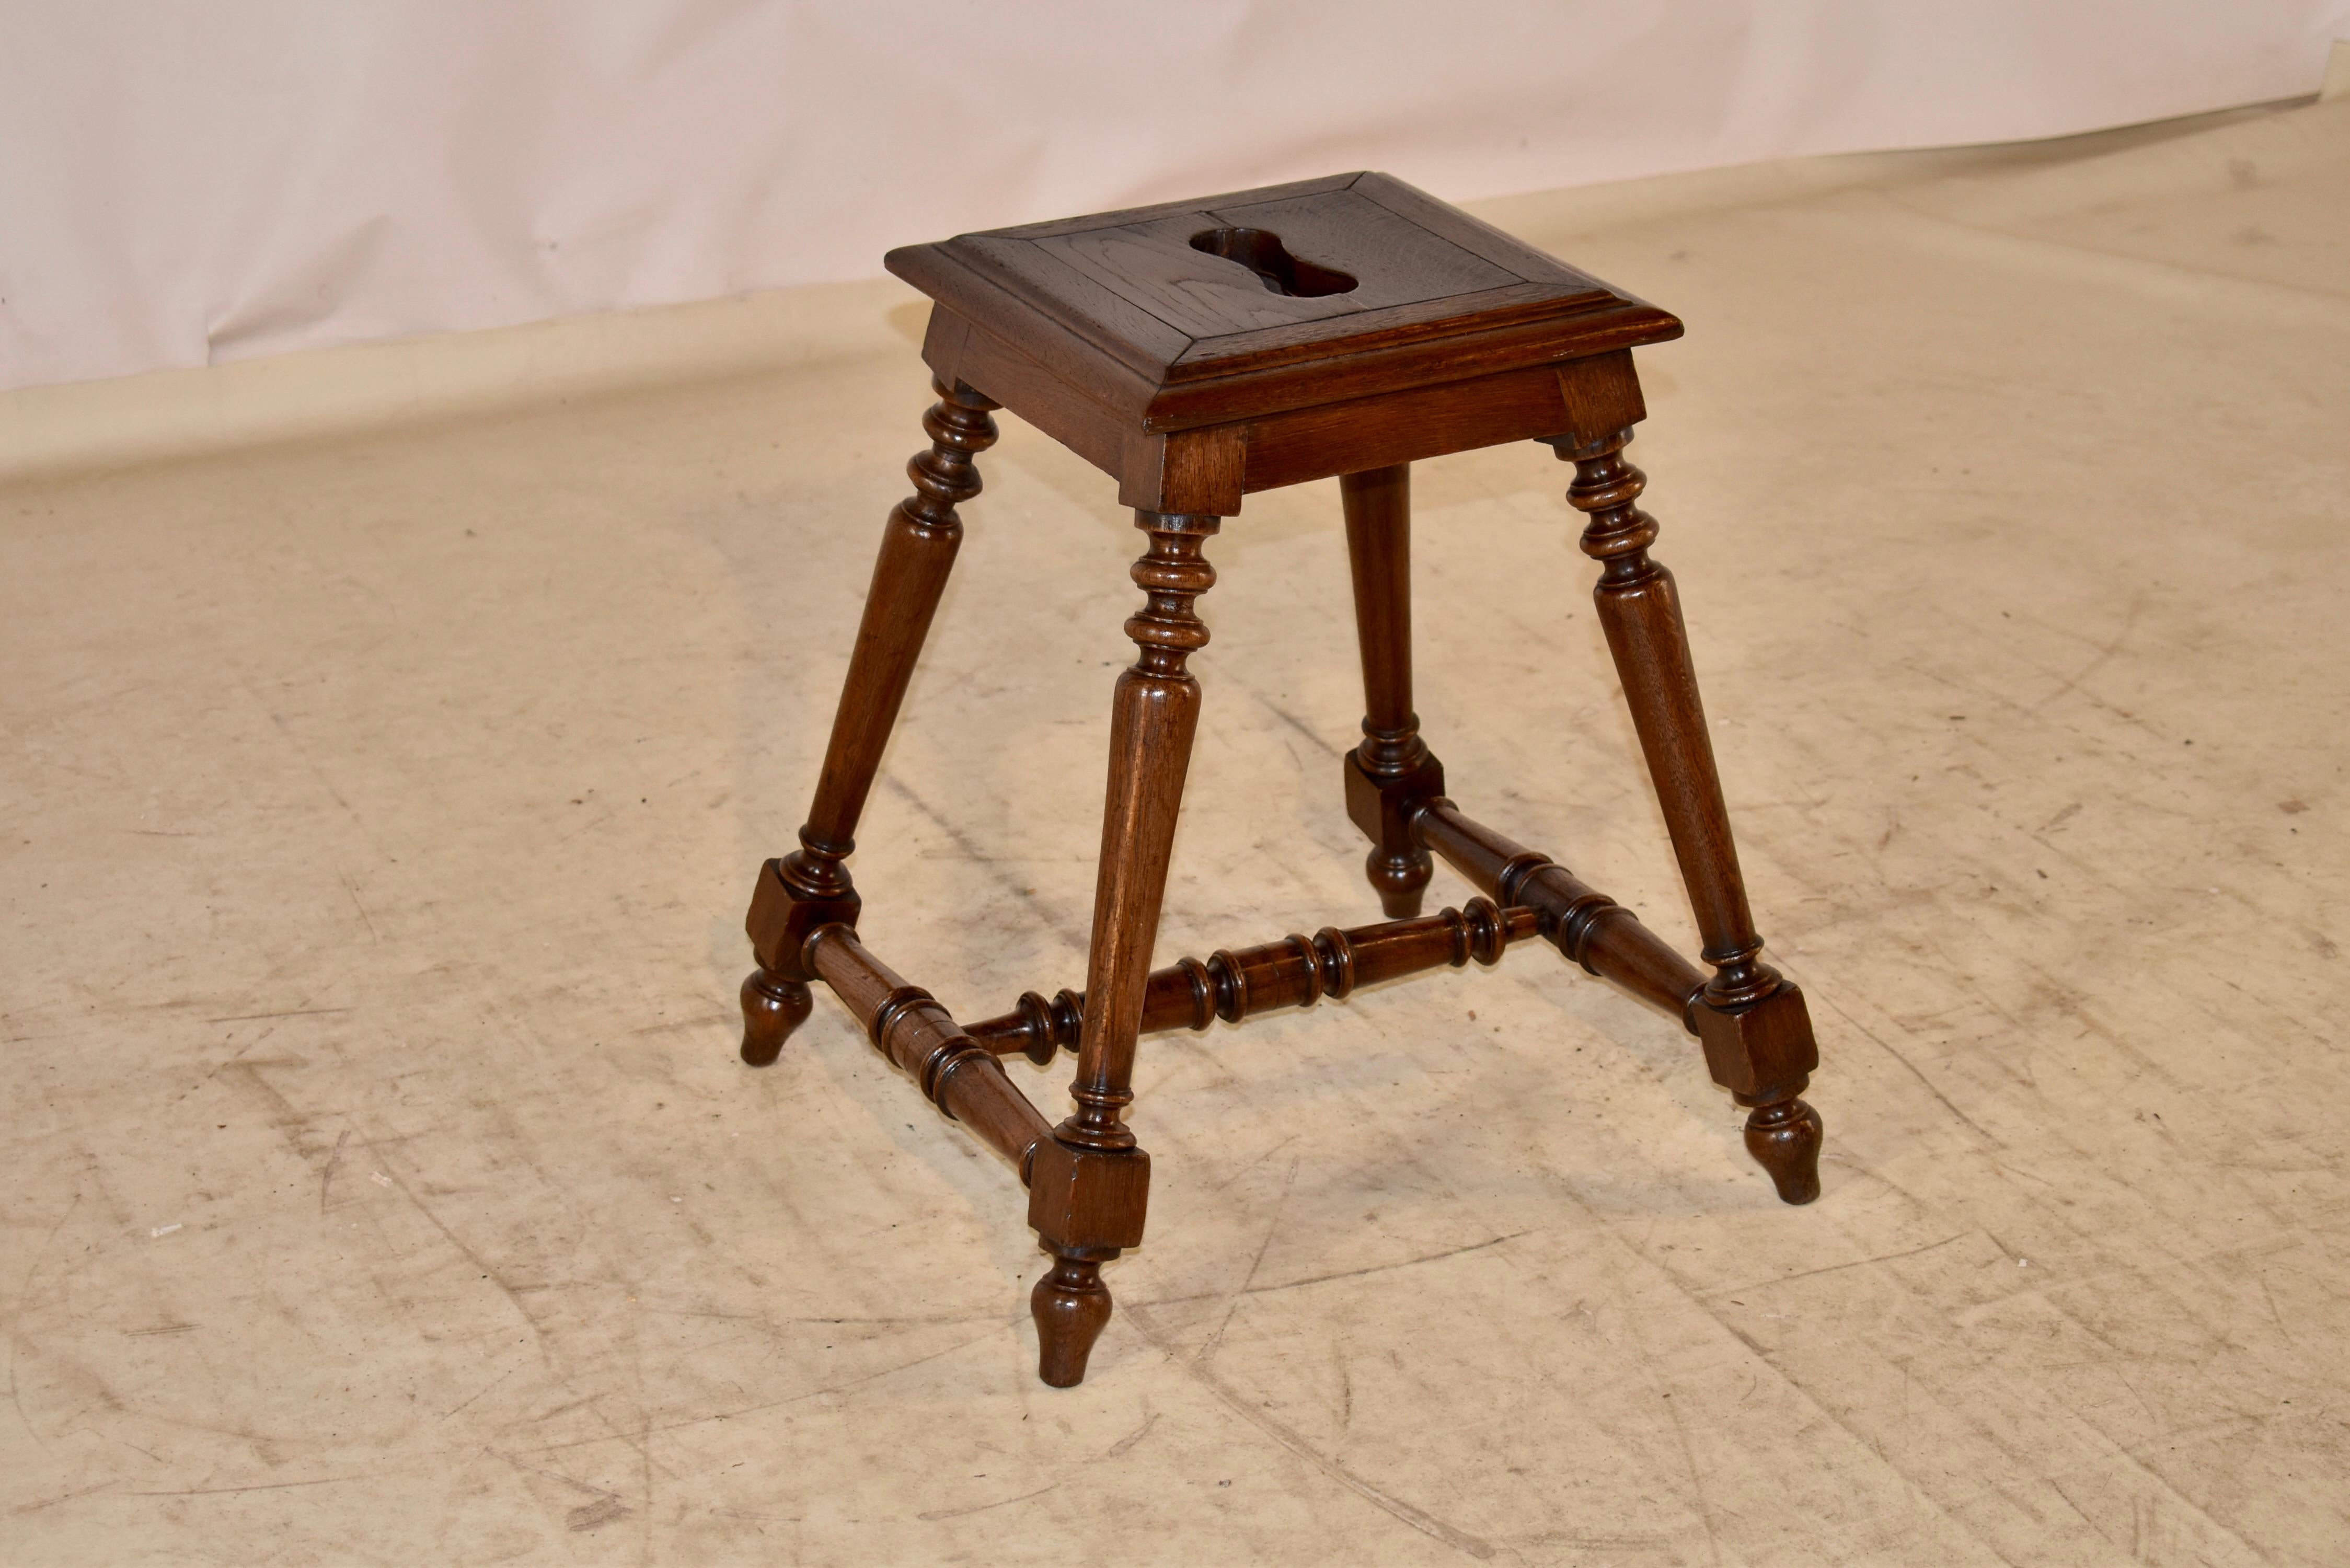 19th century oak stool from France.  The seat has a wide molded edge, surrounding a banded seat with a handle I the center for easy portability.  The seat measures 12.88 inches x 12.75 inches.  The seat is supported on splayed and hand turned legs,